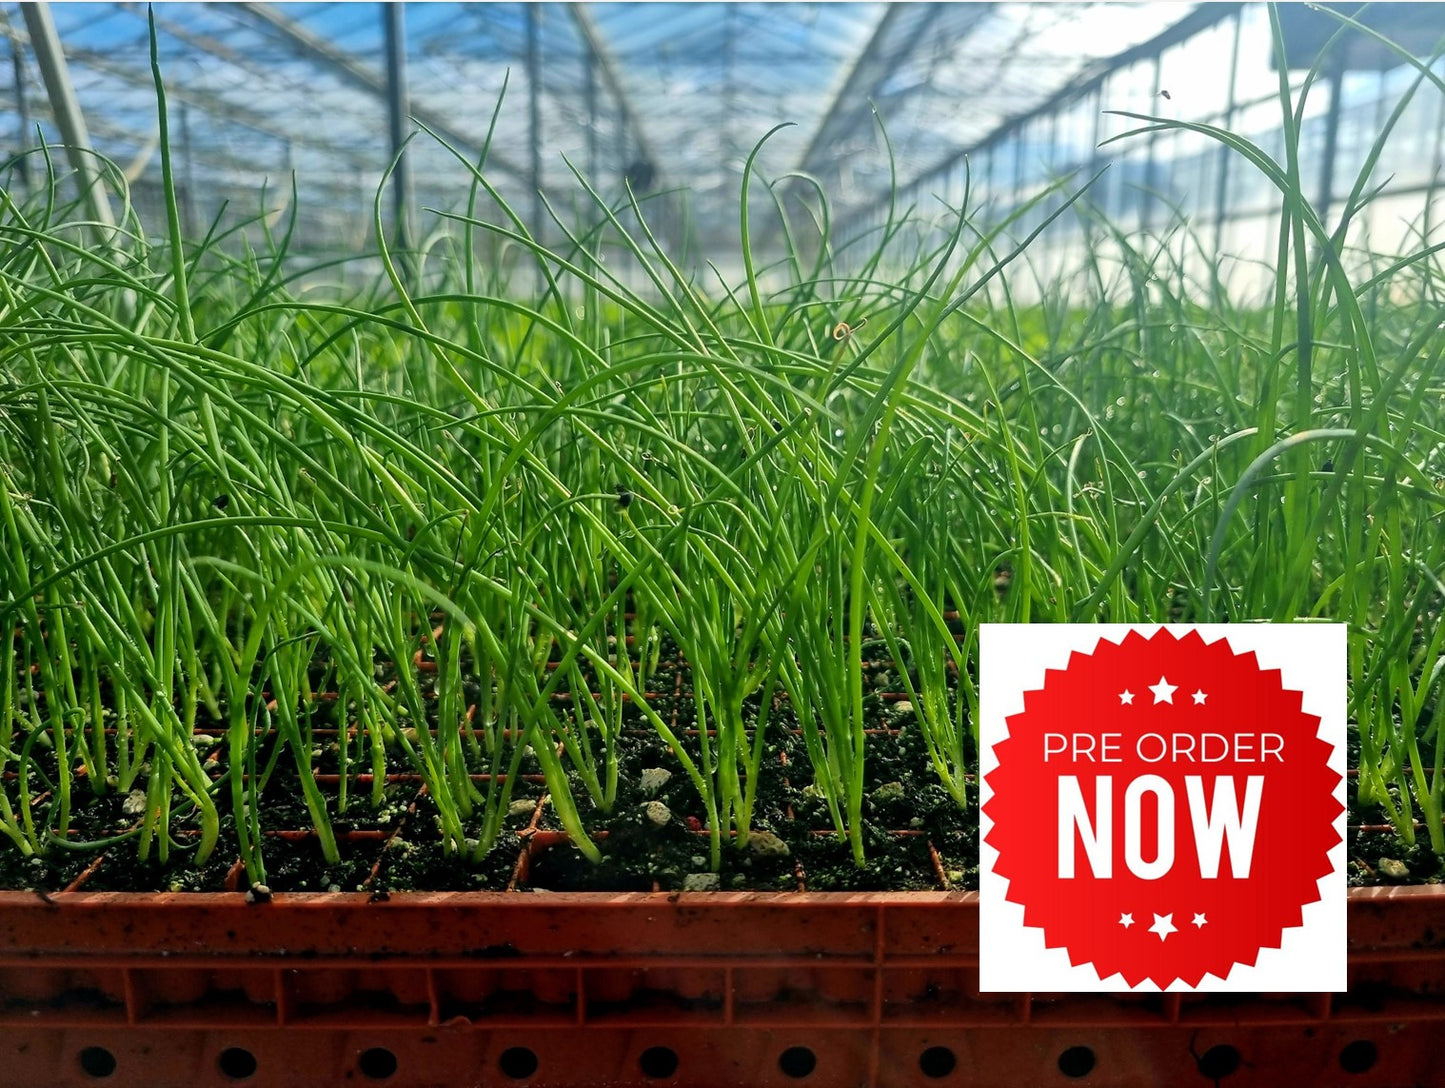 PRE-ORDER 10% OFF - Spring Onion Plug Plants "Grow Your Own" Vegetables **Letterbox Friendly**